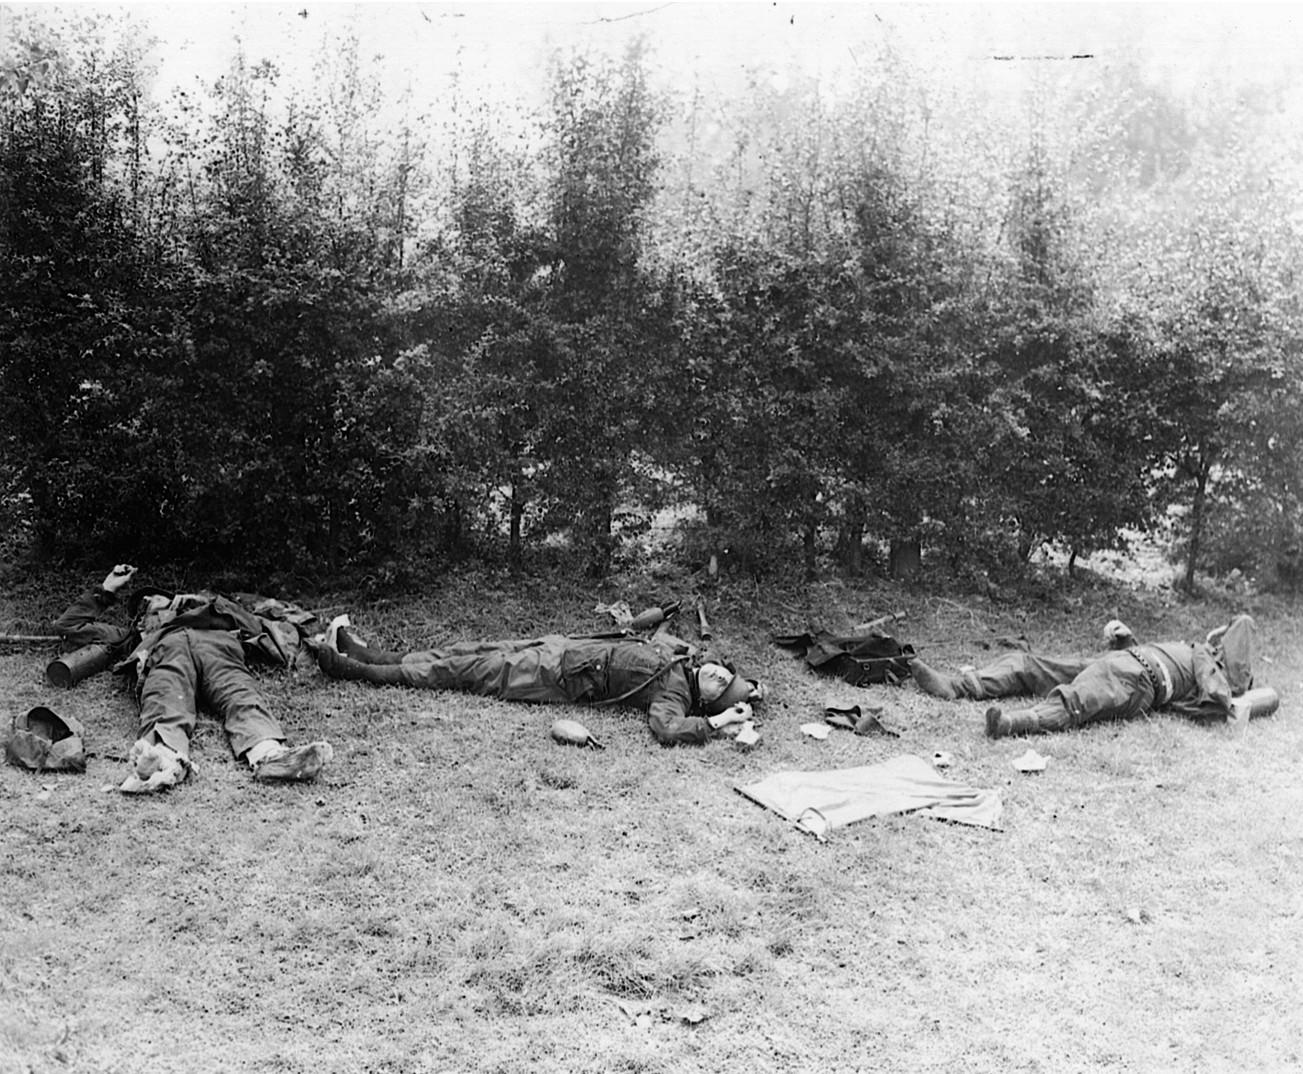 Stripped of their shoes and other much-needed supplies by their comrades, the bodies of three German soldiers lie in the Dutch countryside.